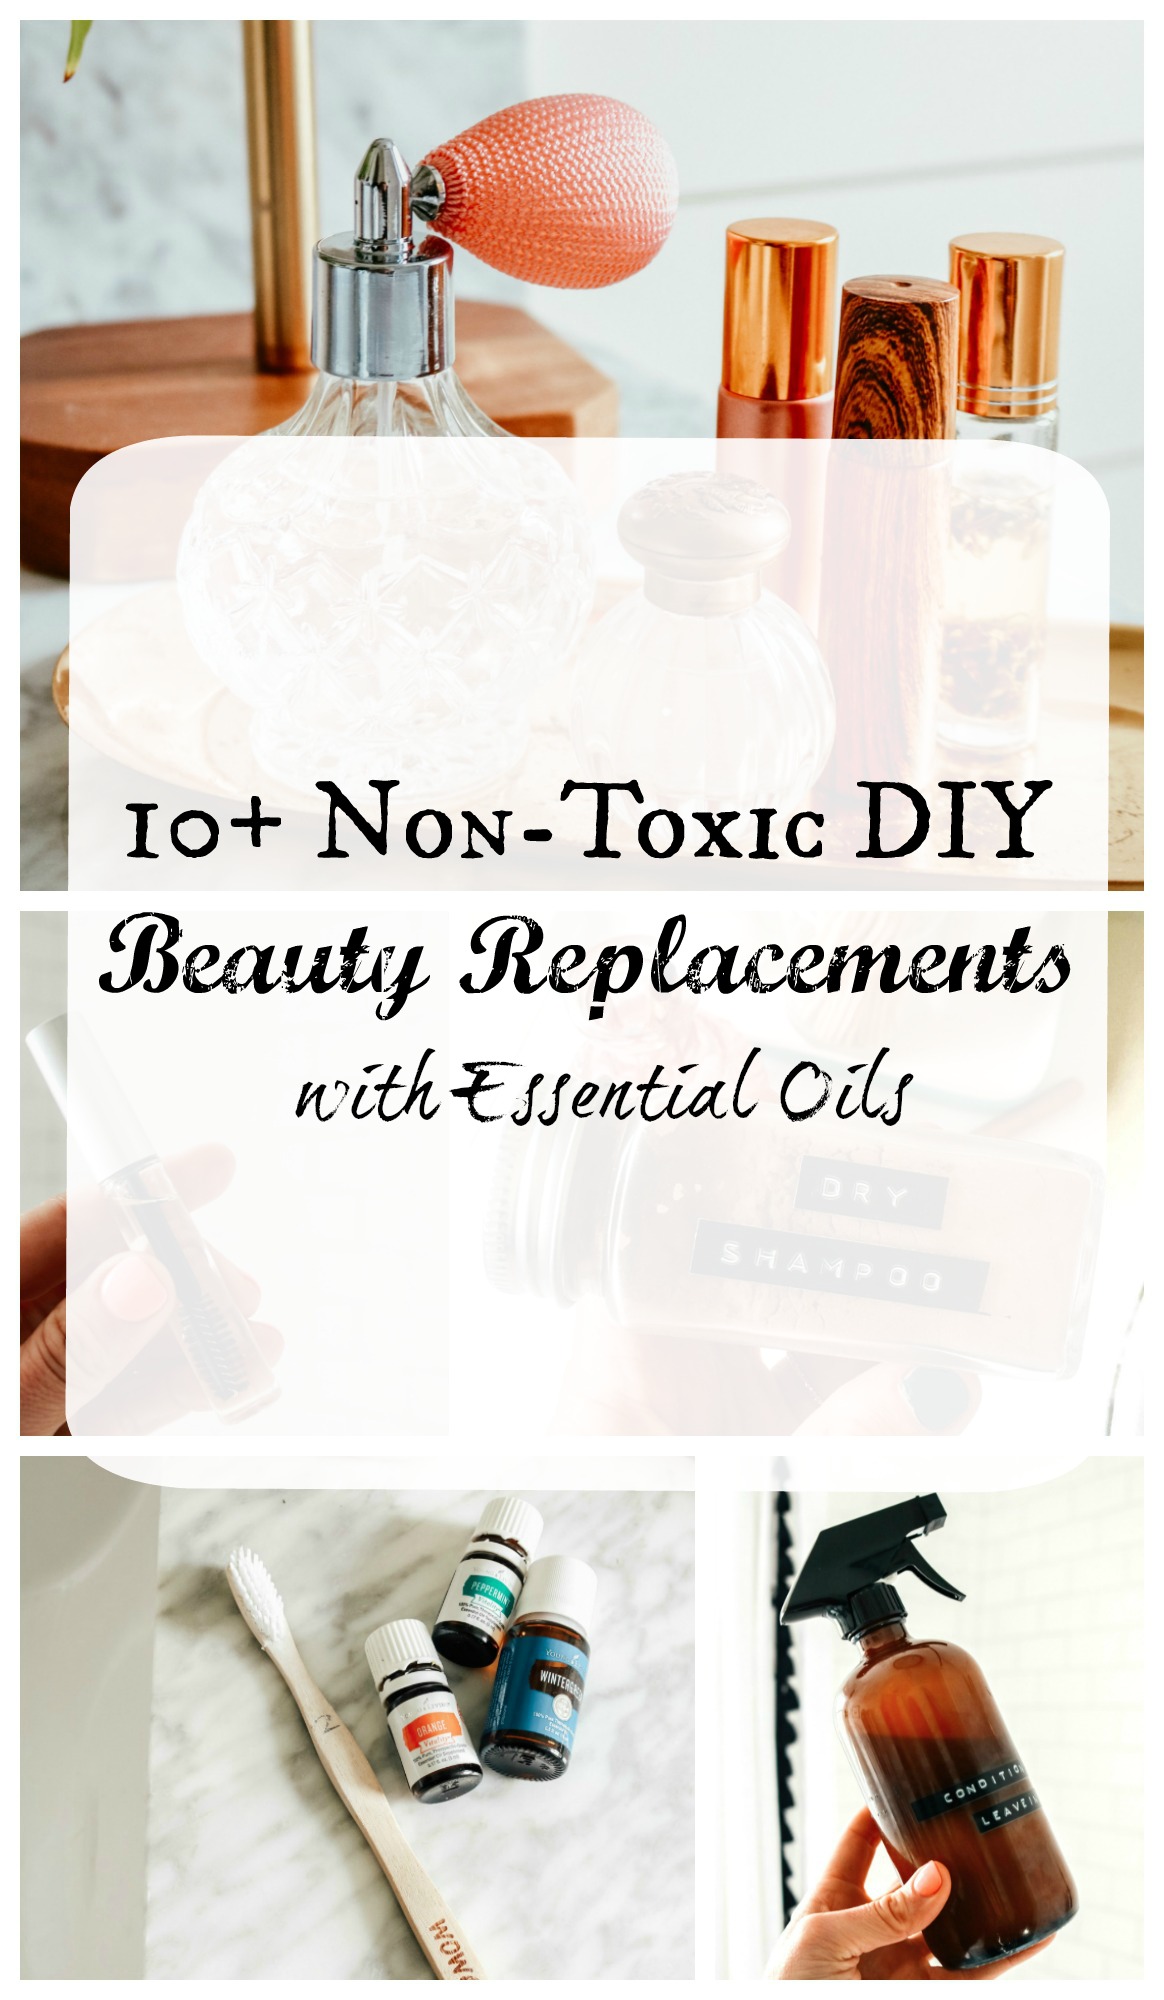 10+ Non-Toxic DIY Beauty Replacements!!!